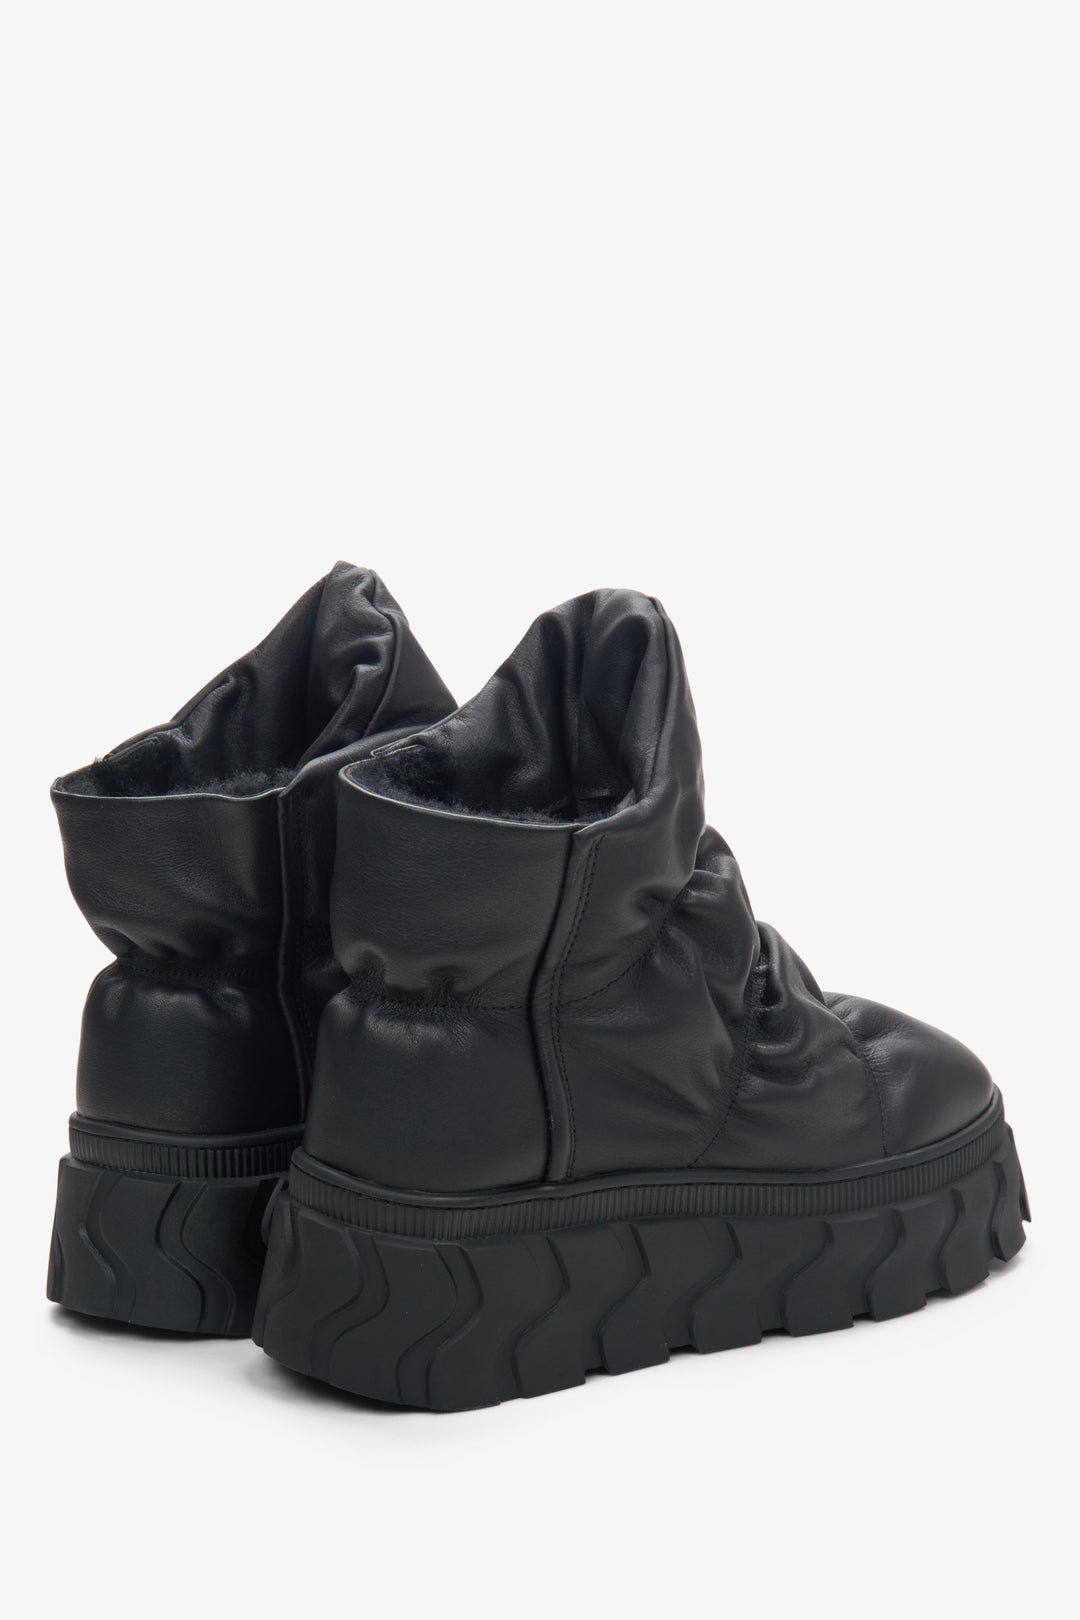 Women's warm and cozy black snow boots Estro - a close-up on shoe toe.